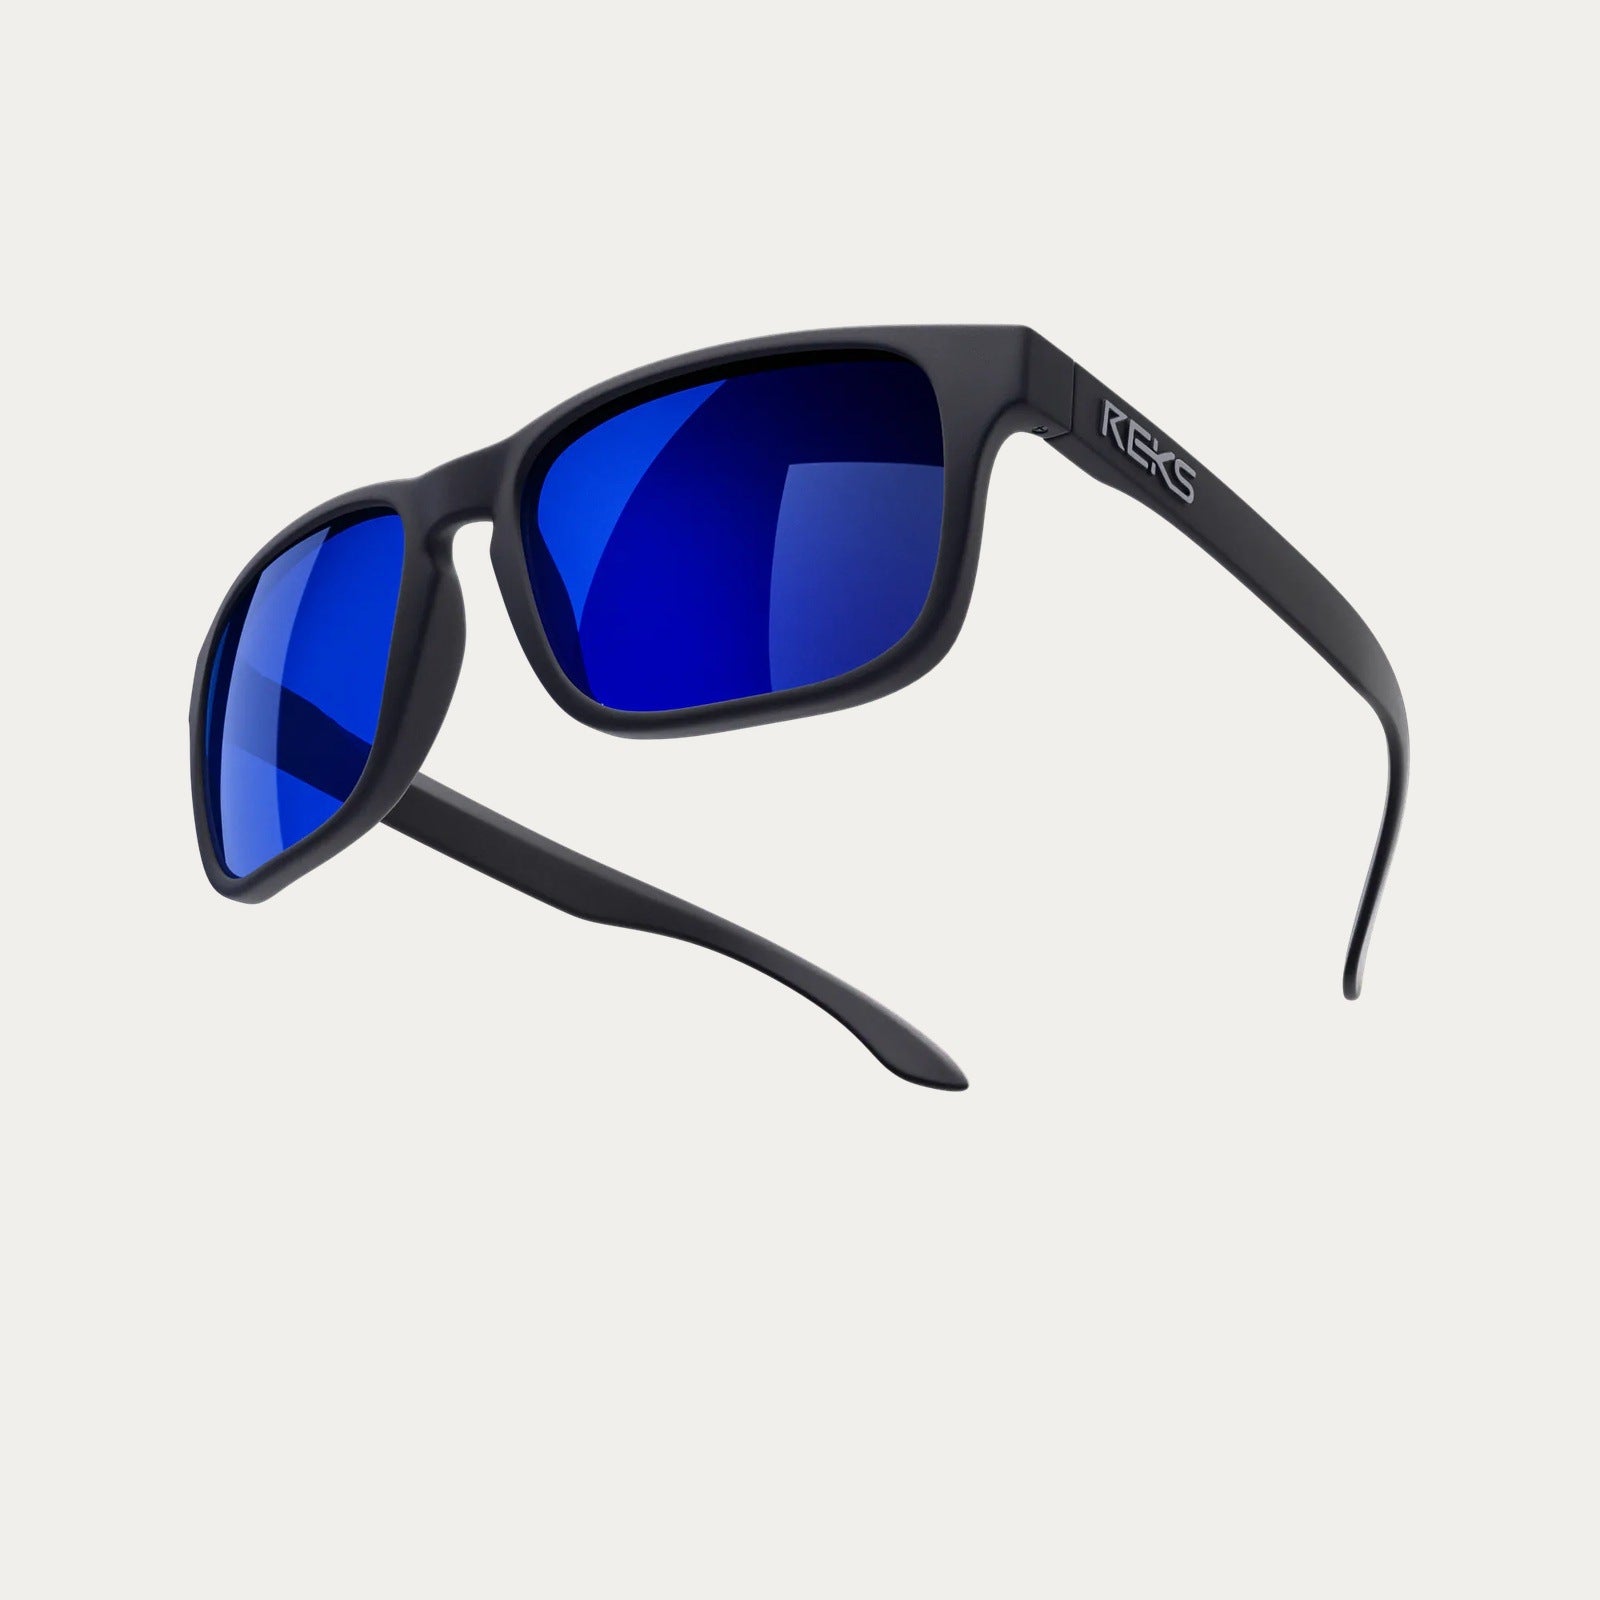 Designer Mirrored Polycarbonate Sunglasses For Men And Women Full Frame,  High Quality, UV400 Protection, Outdoor Eyewear With Protective Case From  Bestforsell, $8.26